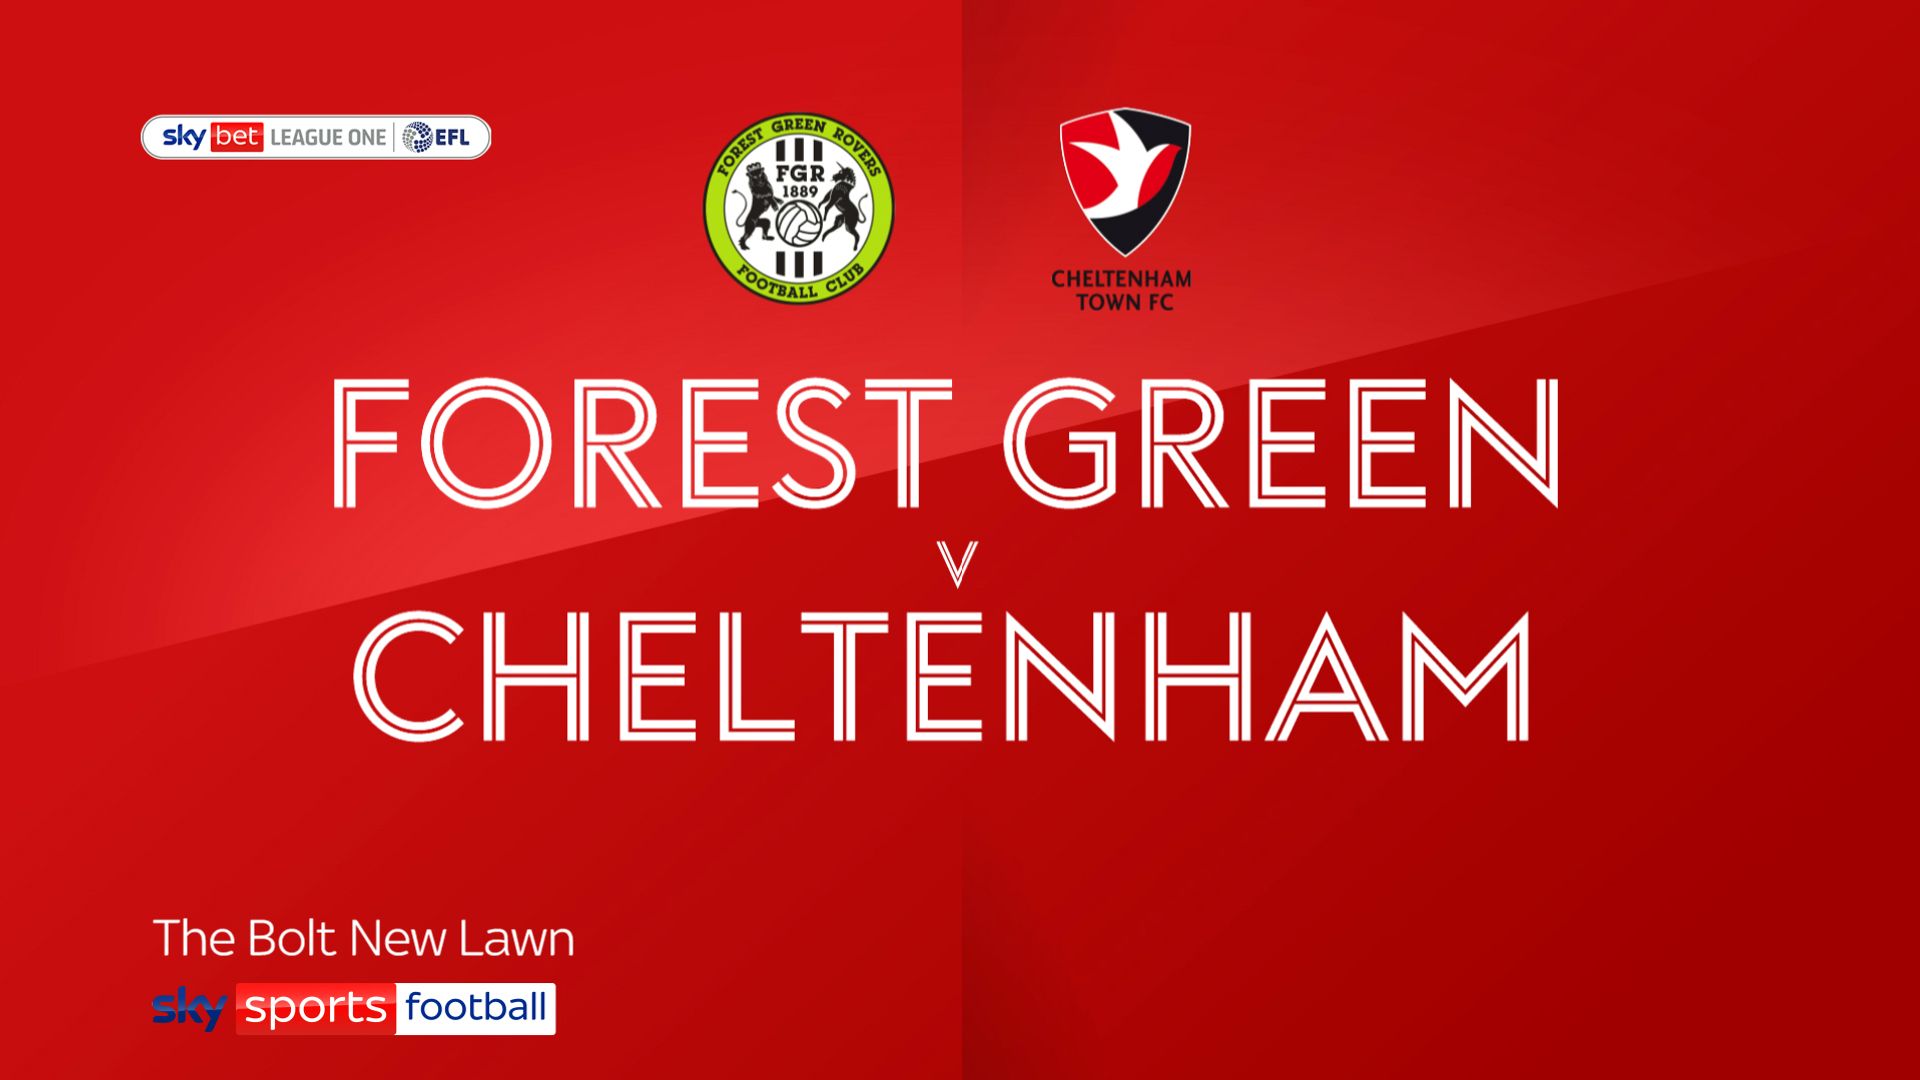 Forest Green 1-0 Cheltenham: Myles Peart-Harris seals win for Rovers